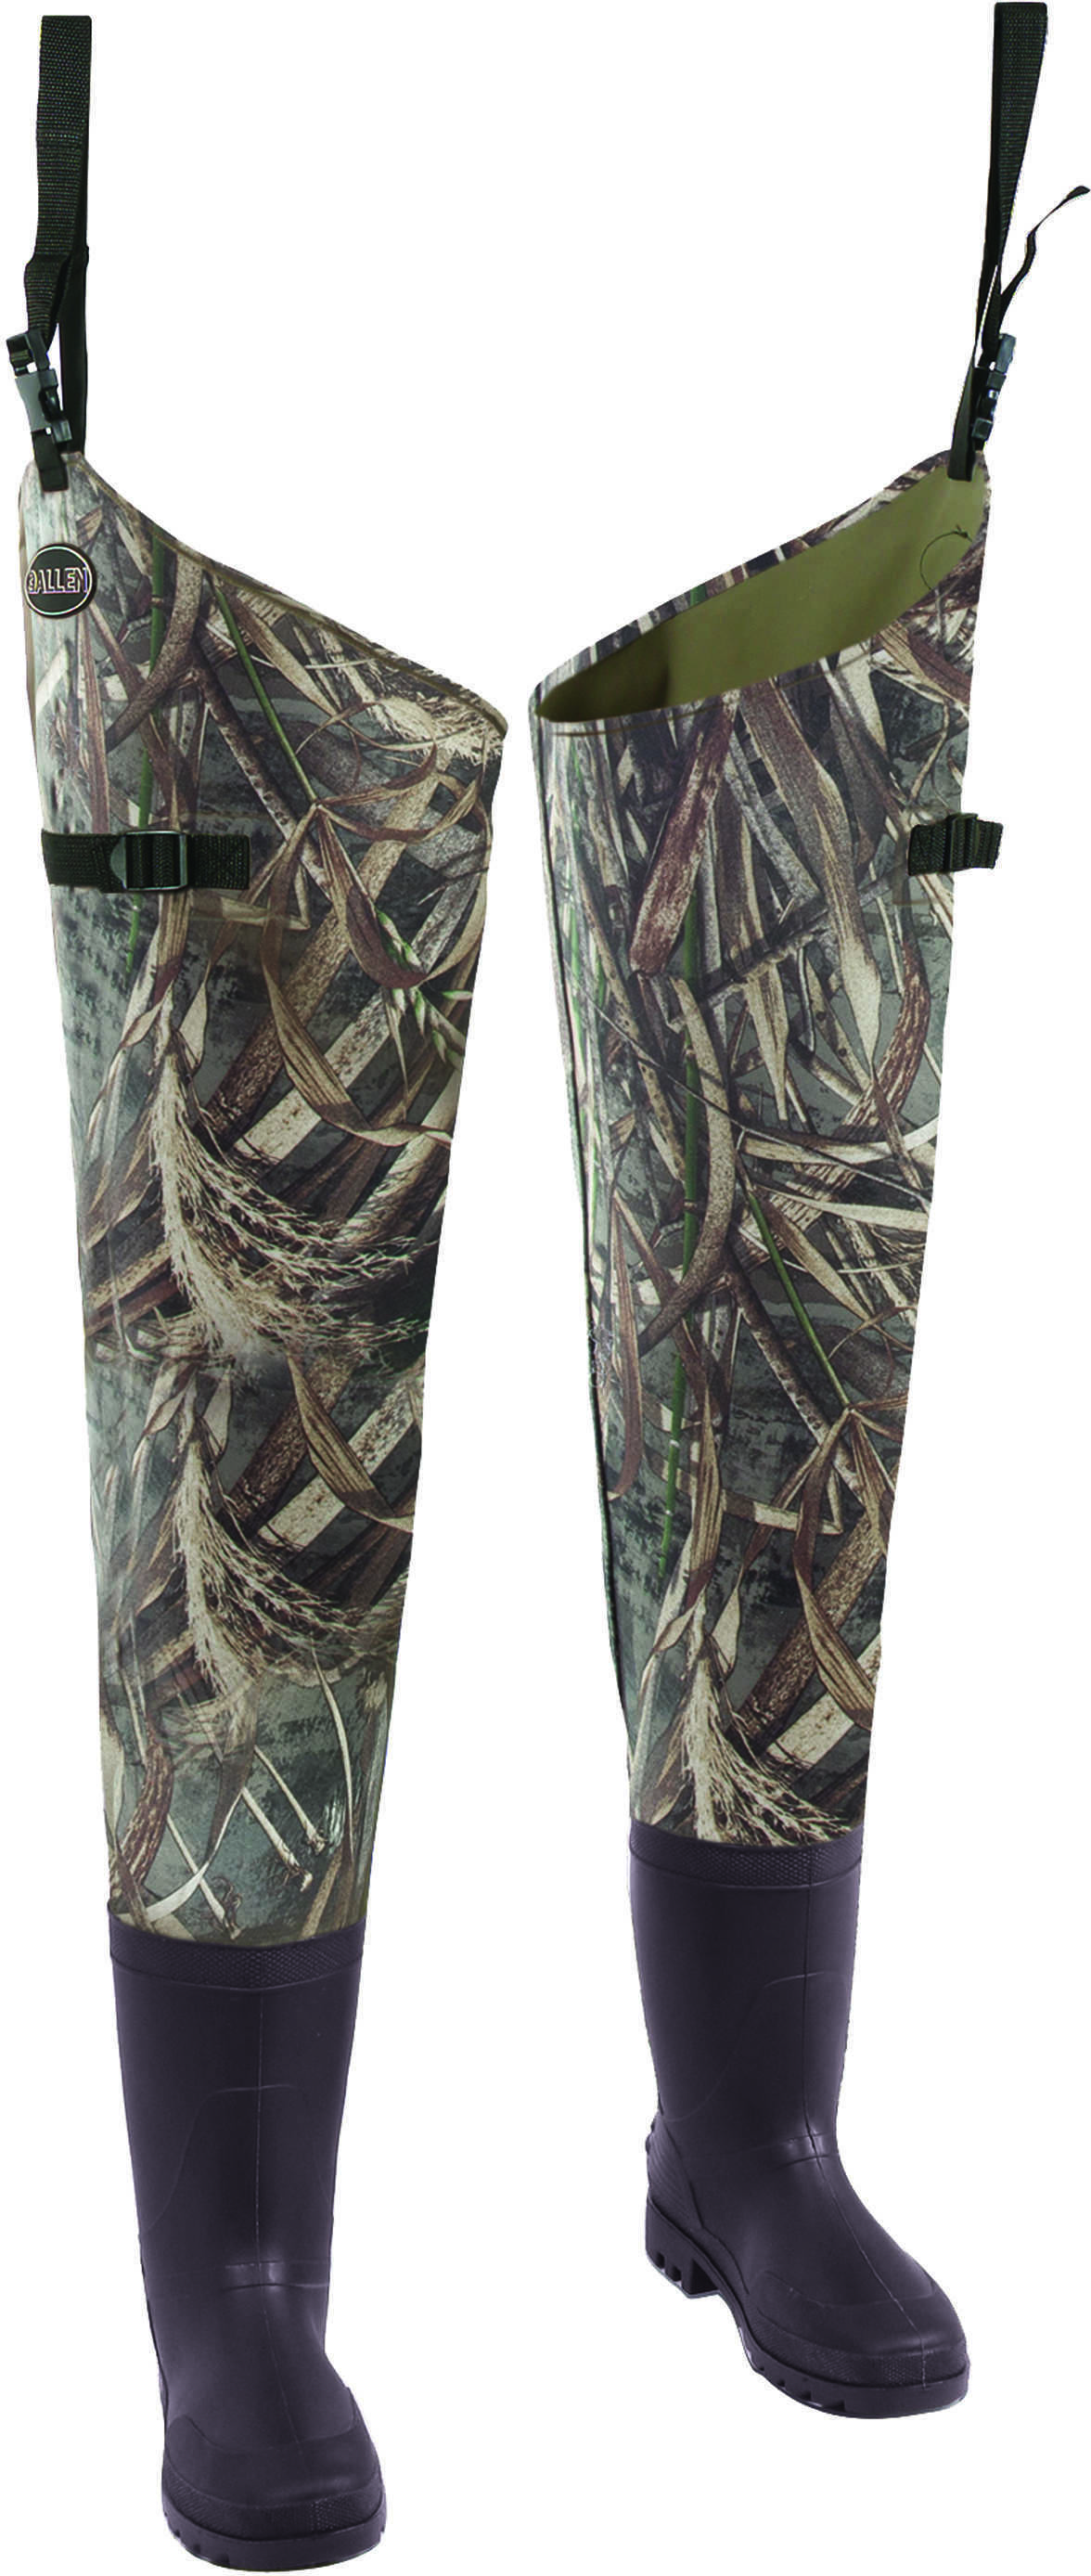 Allen Wader - Dillon 2-Ply Hip, Size 8, Realtree Max-5 Md: 11848